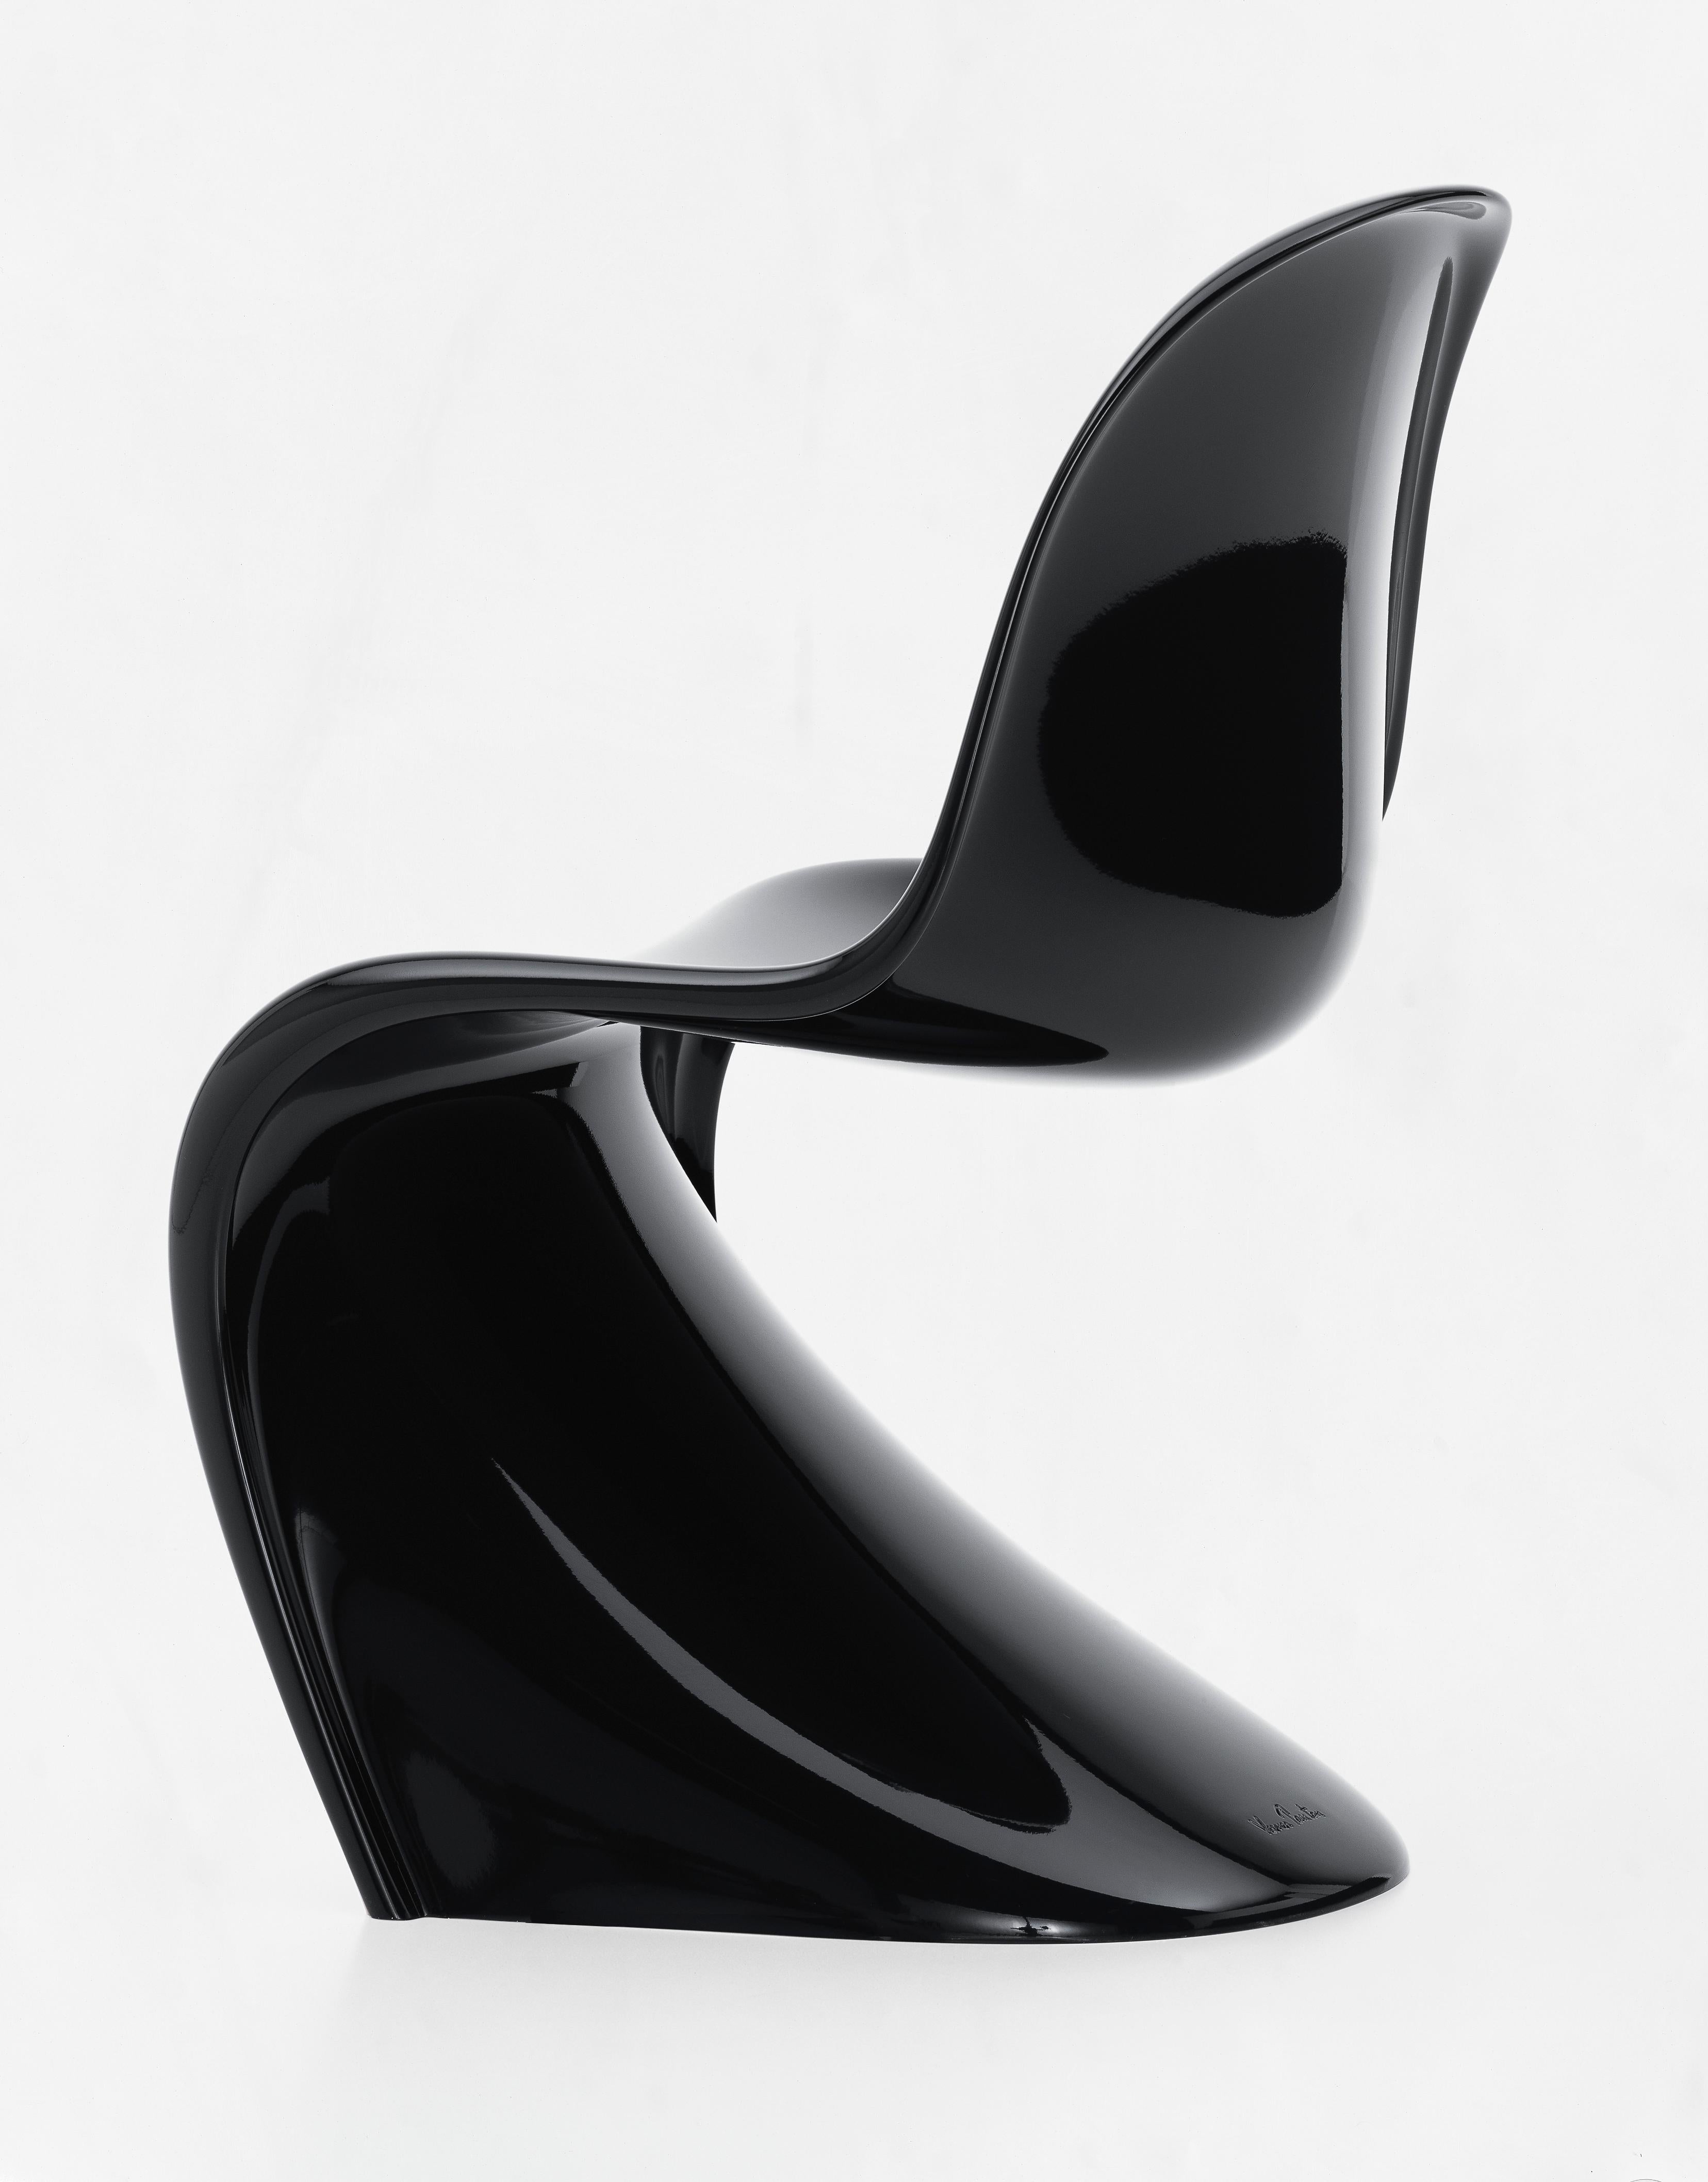 These items are currently only available in the United States.

Having conceived a design for an all-plastic chair made from one piece, it took Verner Panton several years to find a manufacturer. He first came into contact with Vitra in 1963 and